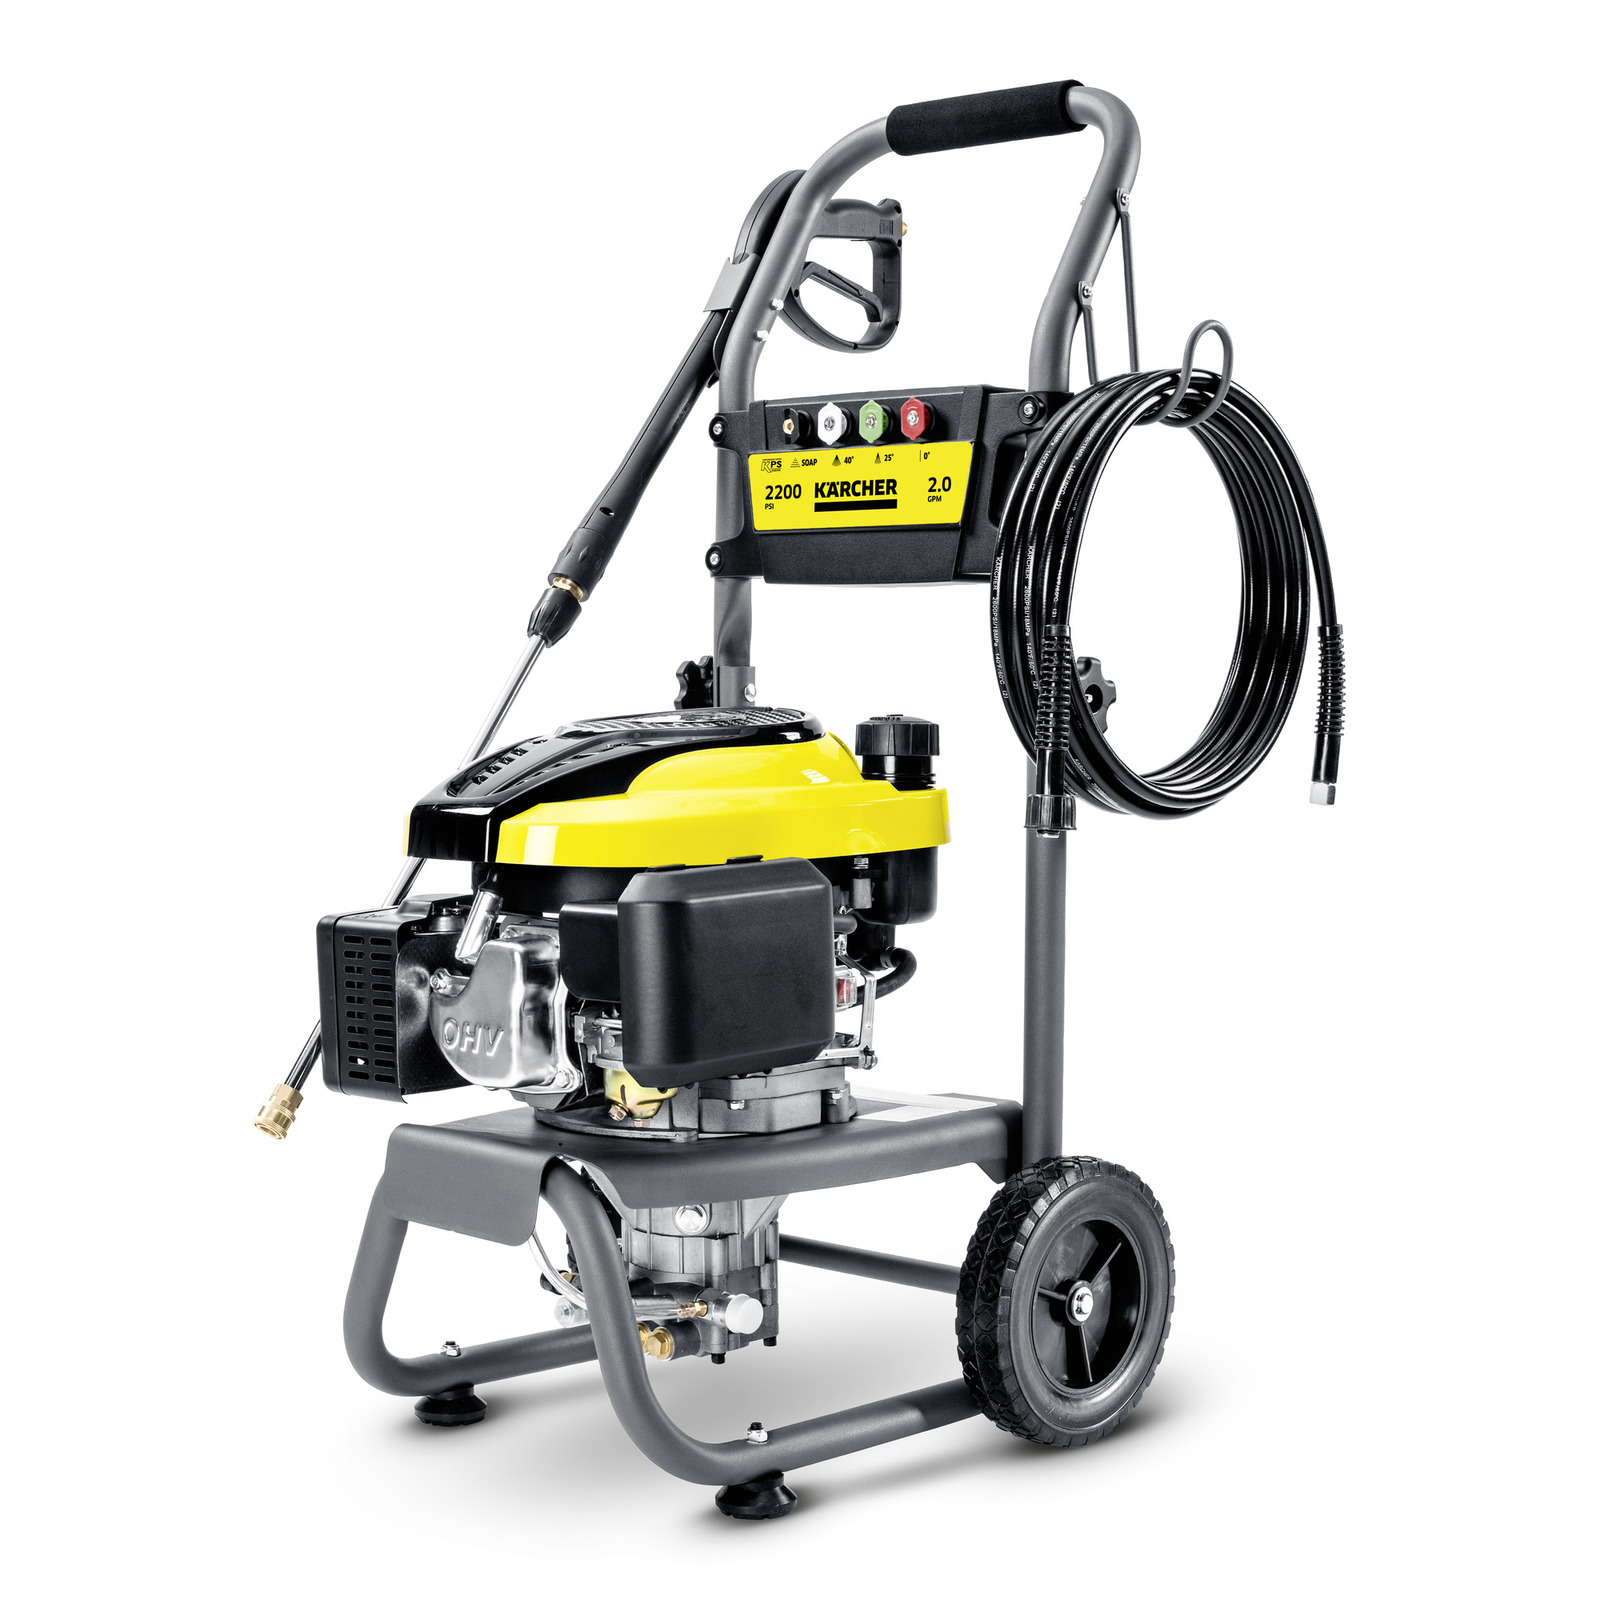 G 2200 Gas Powered Pressure Washer, 2200 PSI, 1.107-279.0